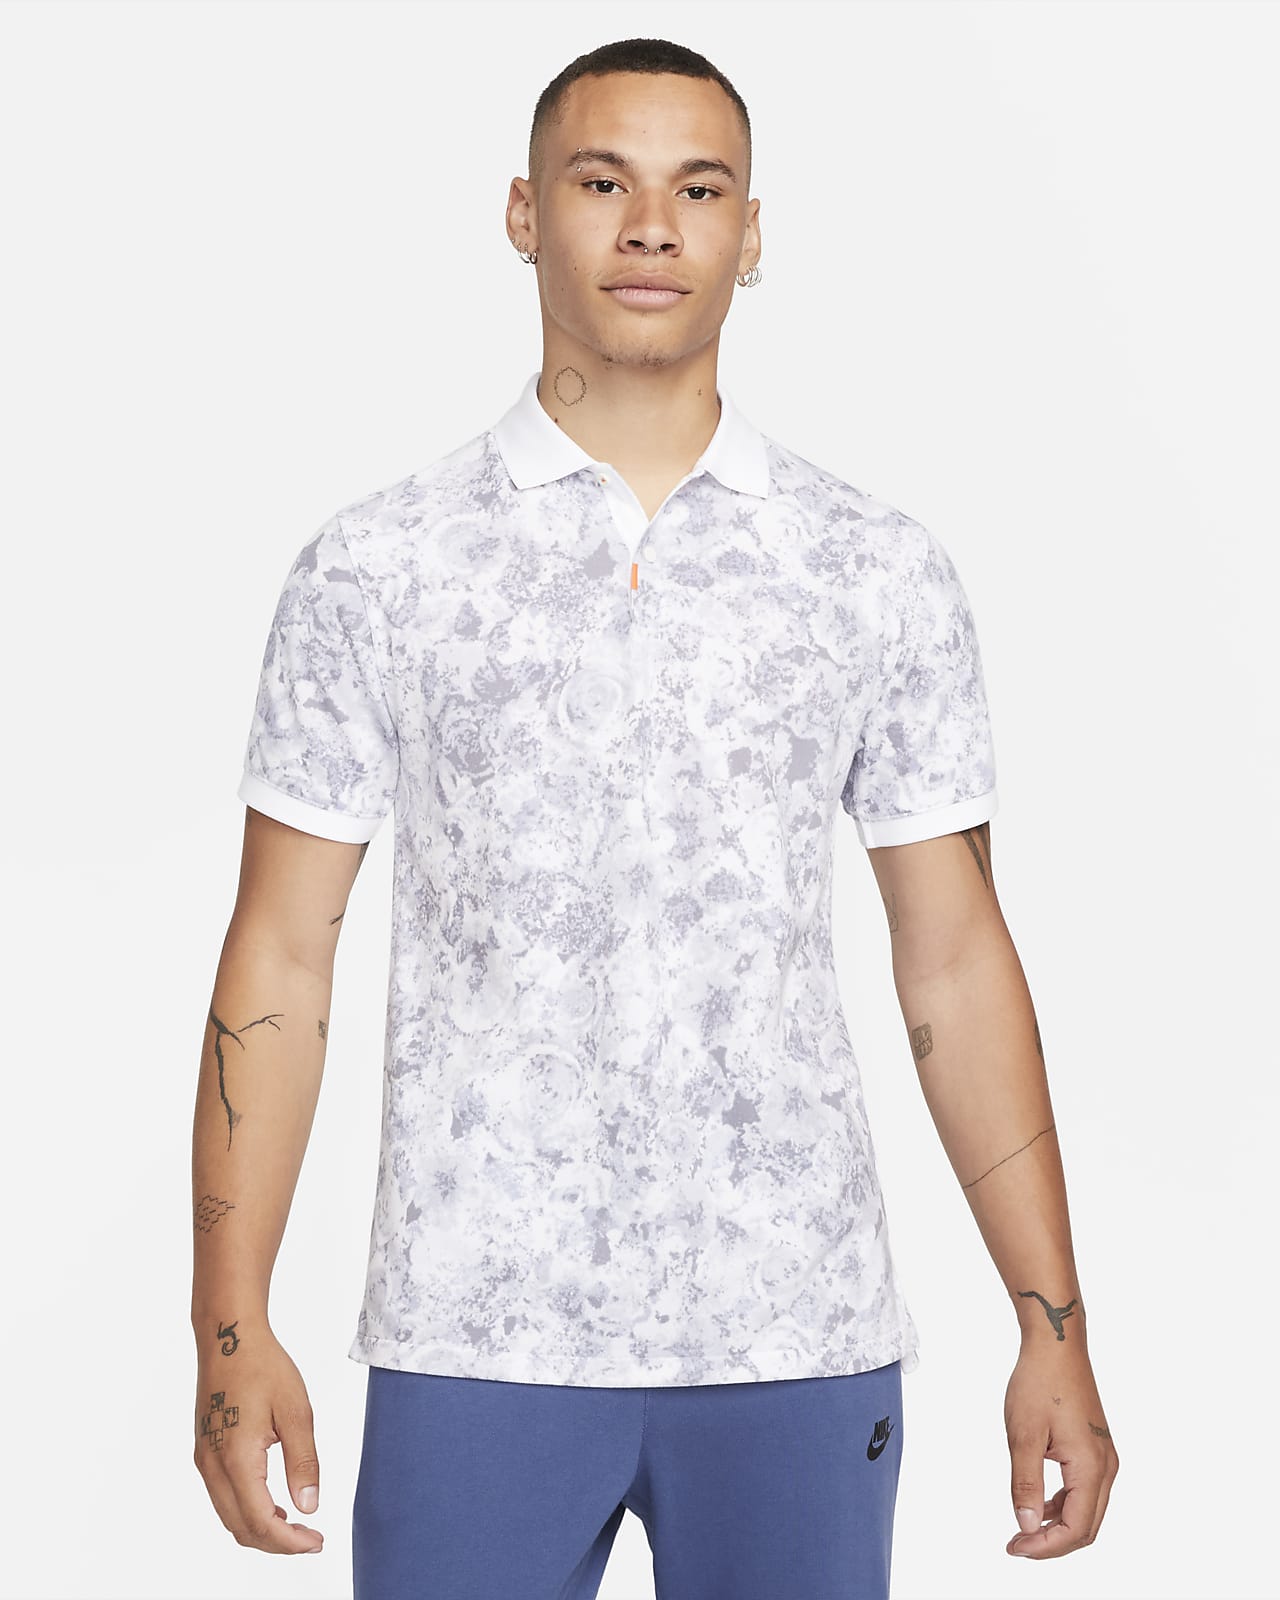 The Nike Polo Men's Printed Slim-Fit Polo